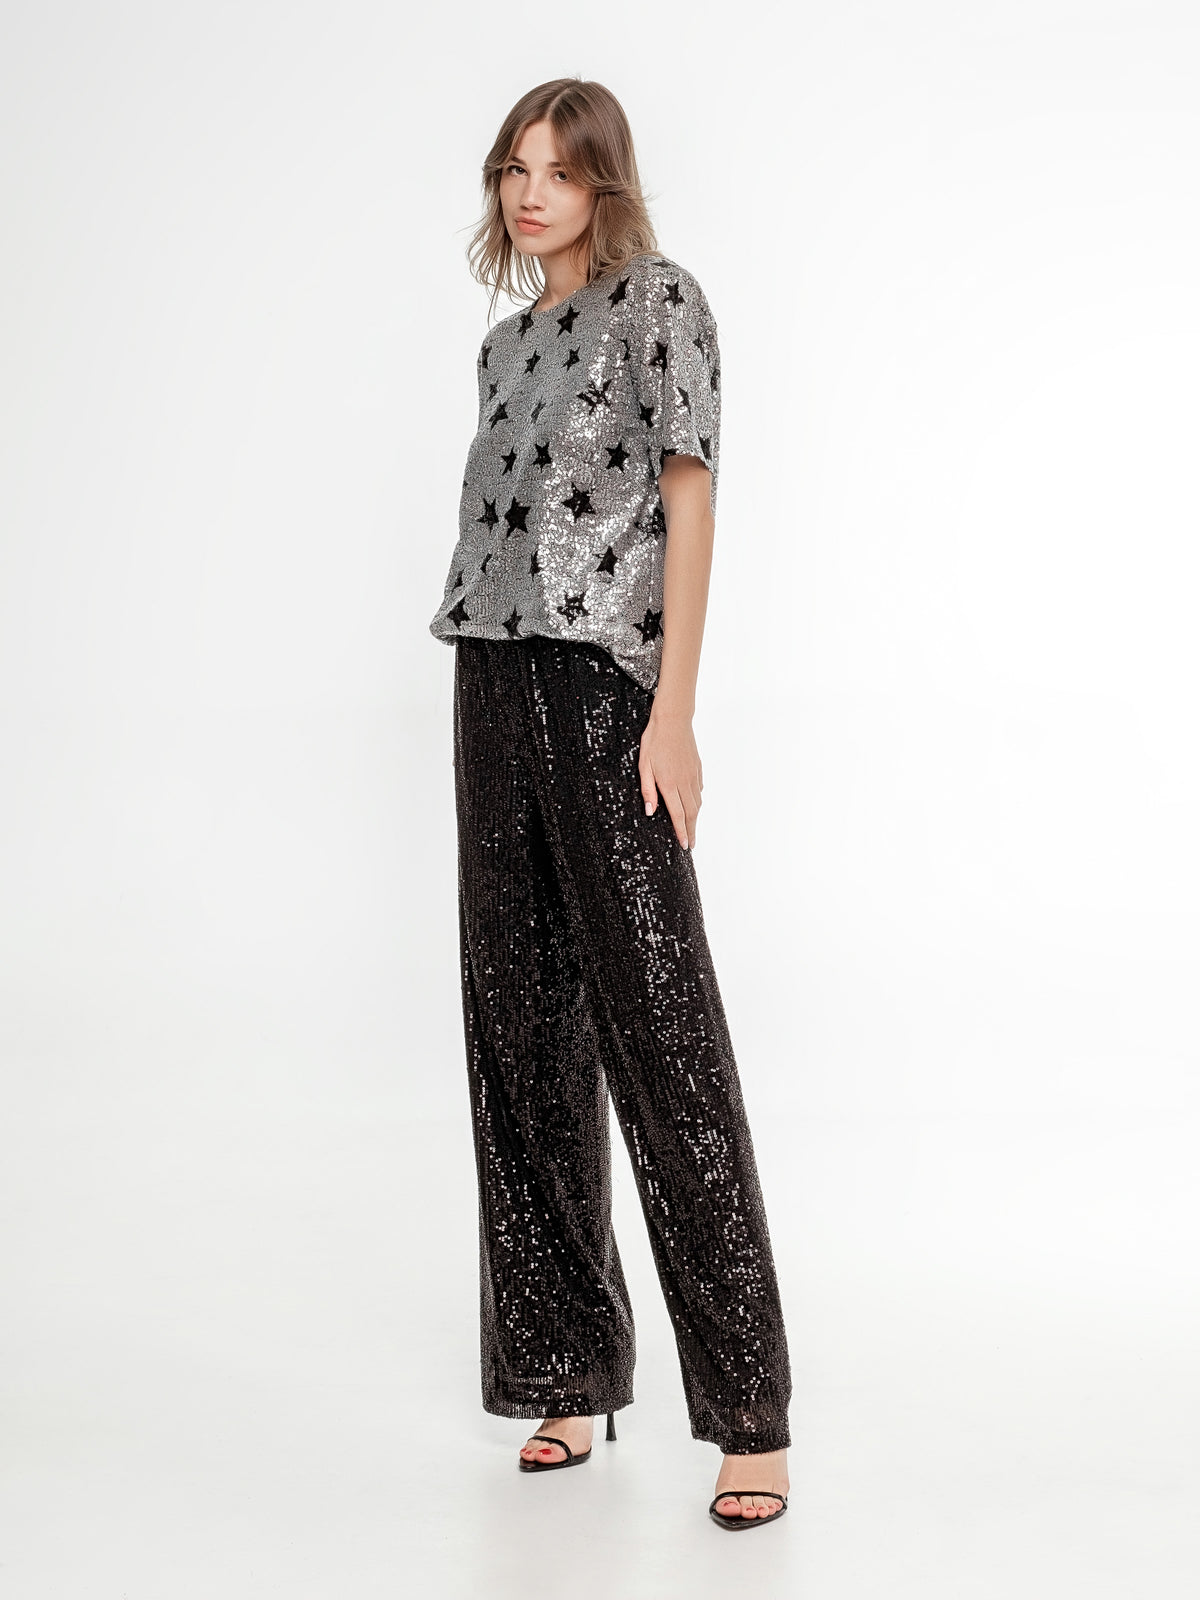 silver glitter top with stars and black glitter wide pants occasion wear